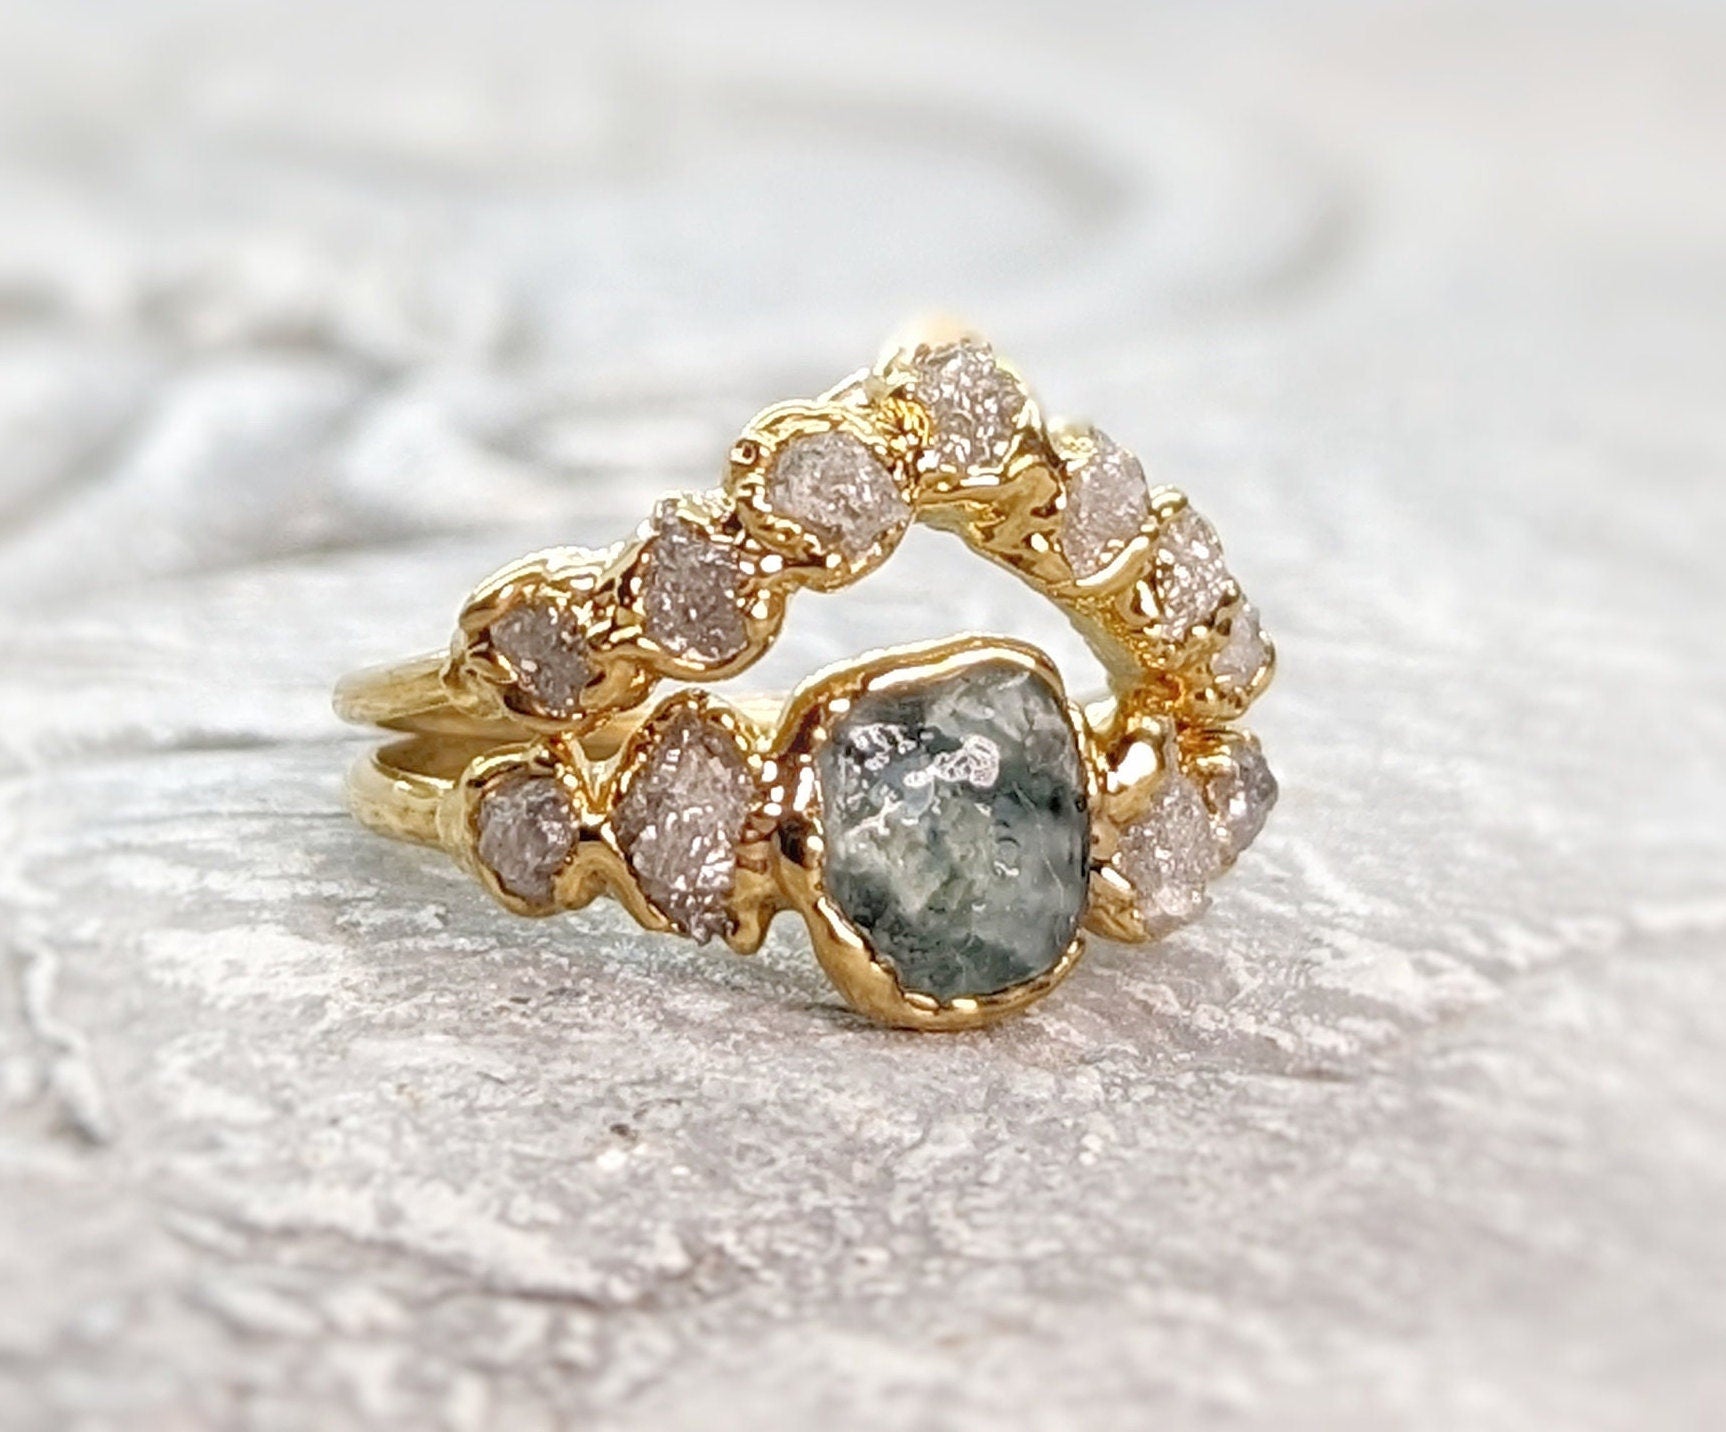 Raw Montana Sapphire and rough uncut diamond Chevron Engagement and wedding ring set in 18k Gold